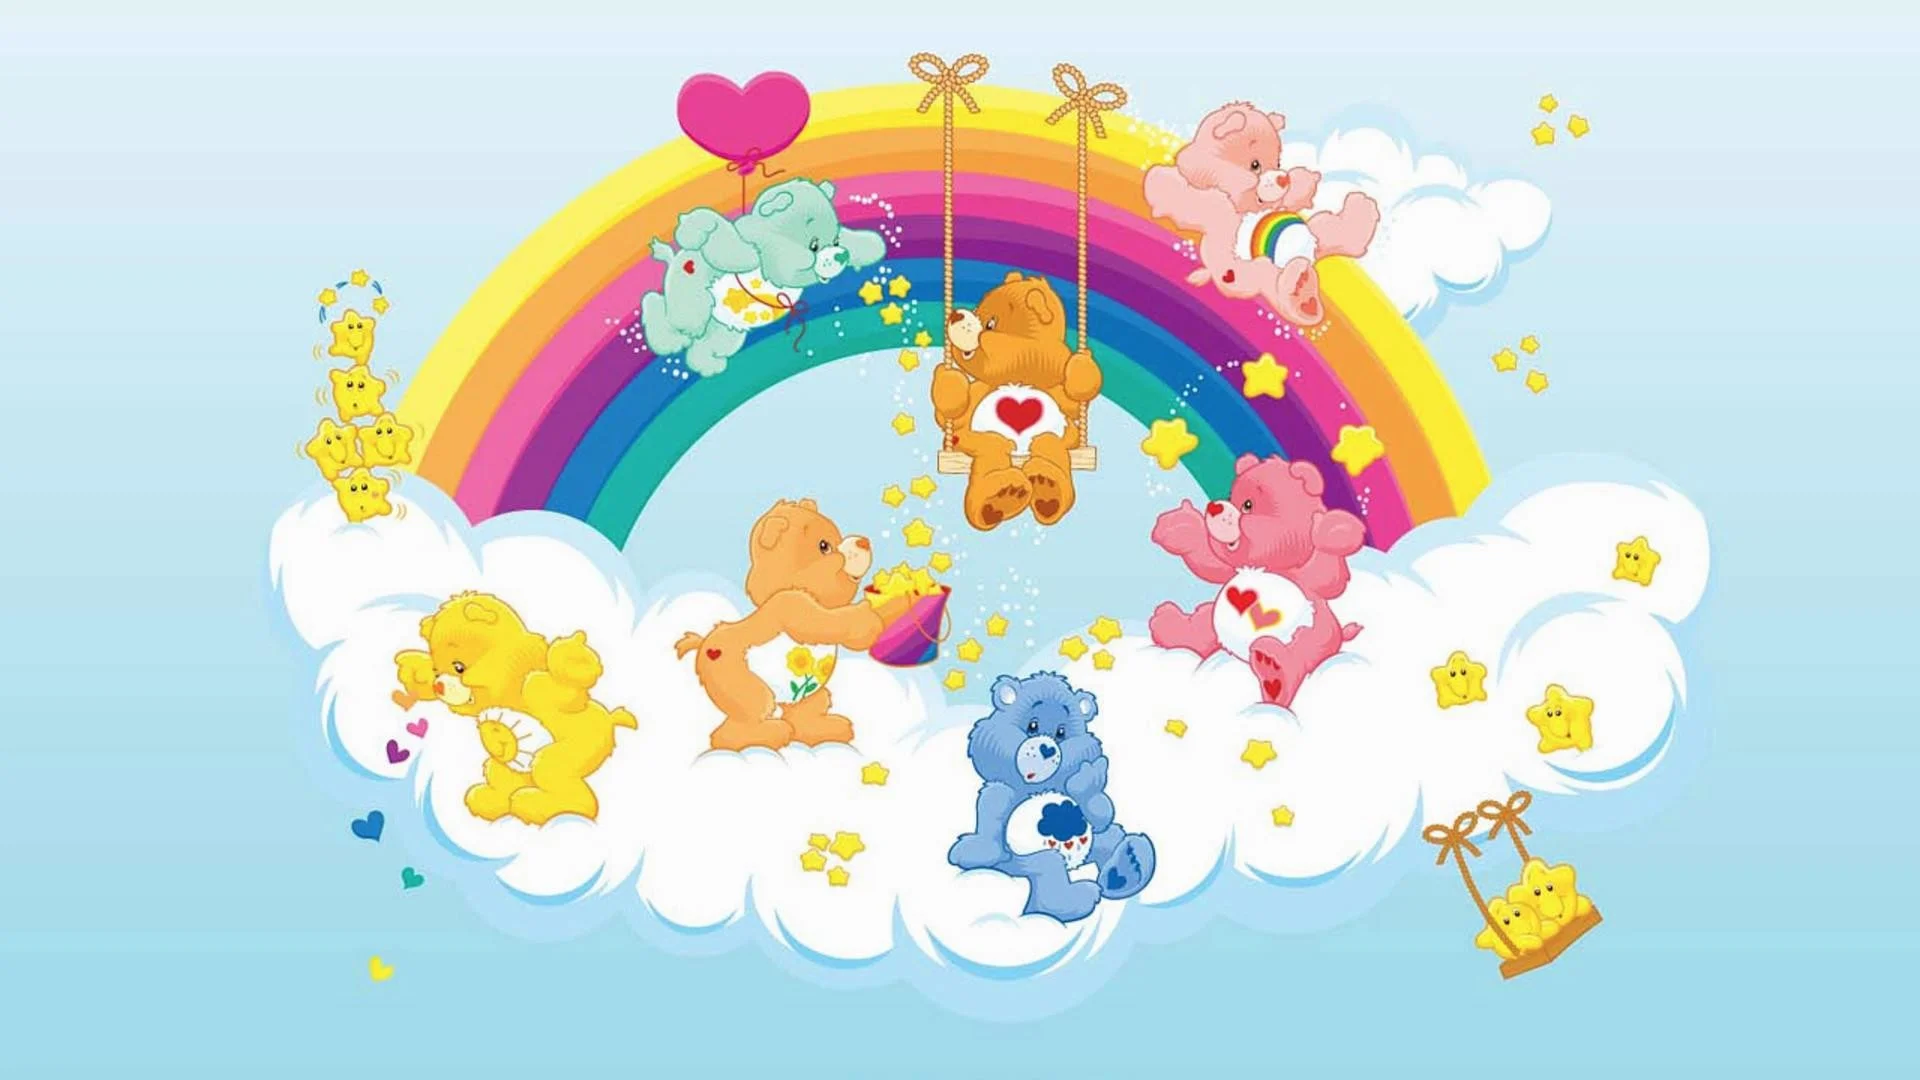 Wallpaper.wiki Care Bear HD Background PIC WPC004474